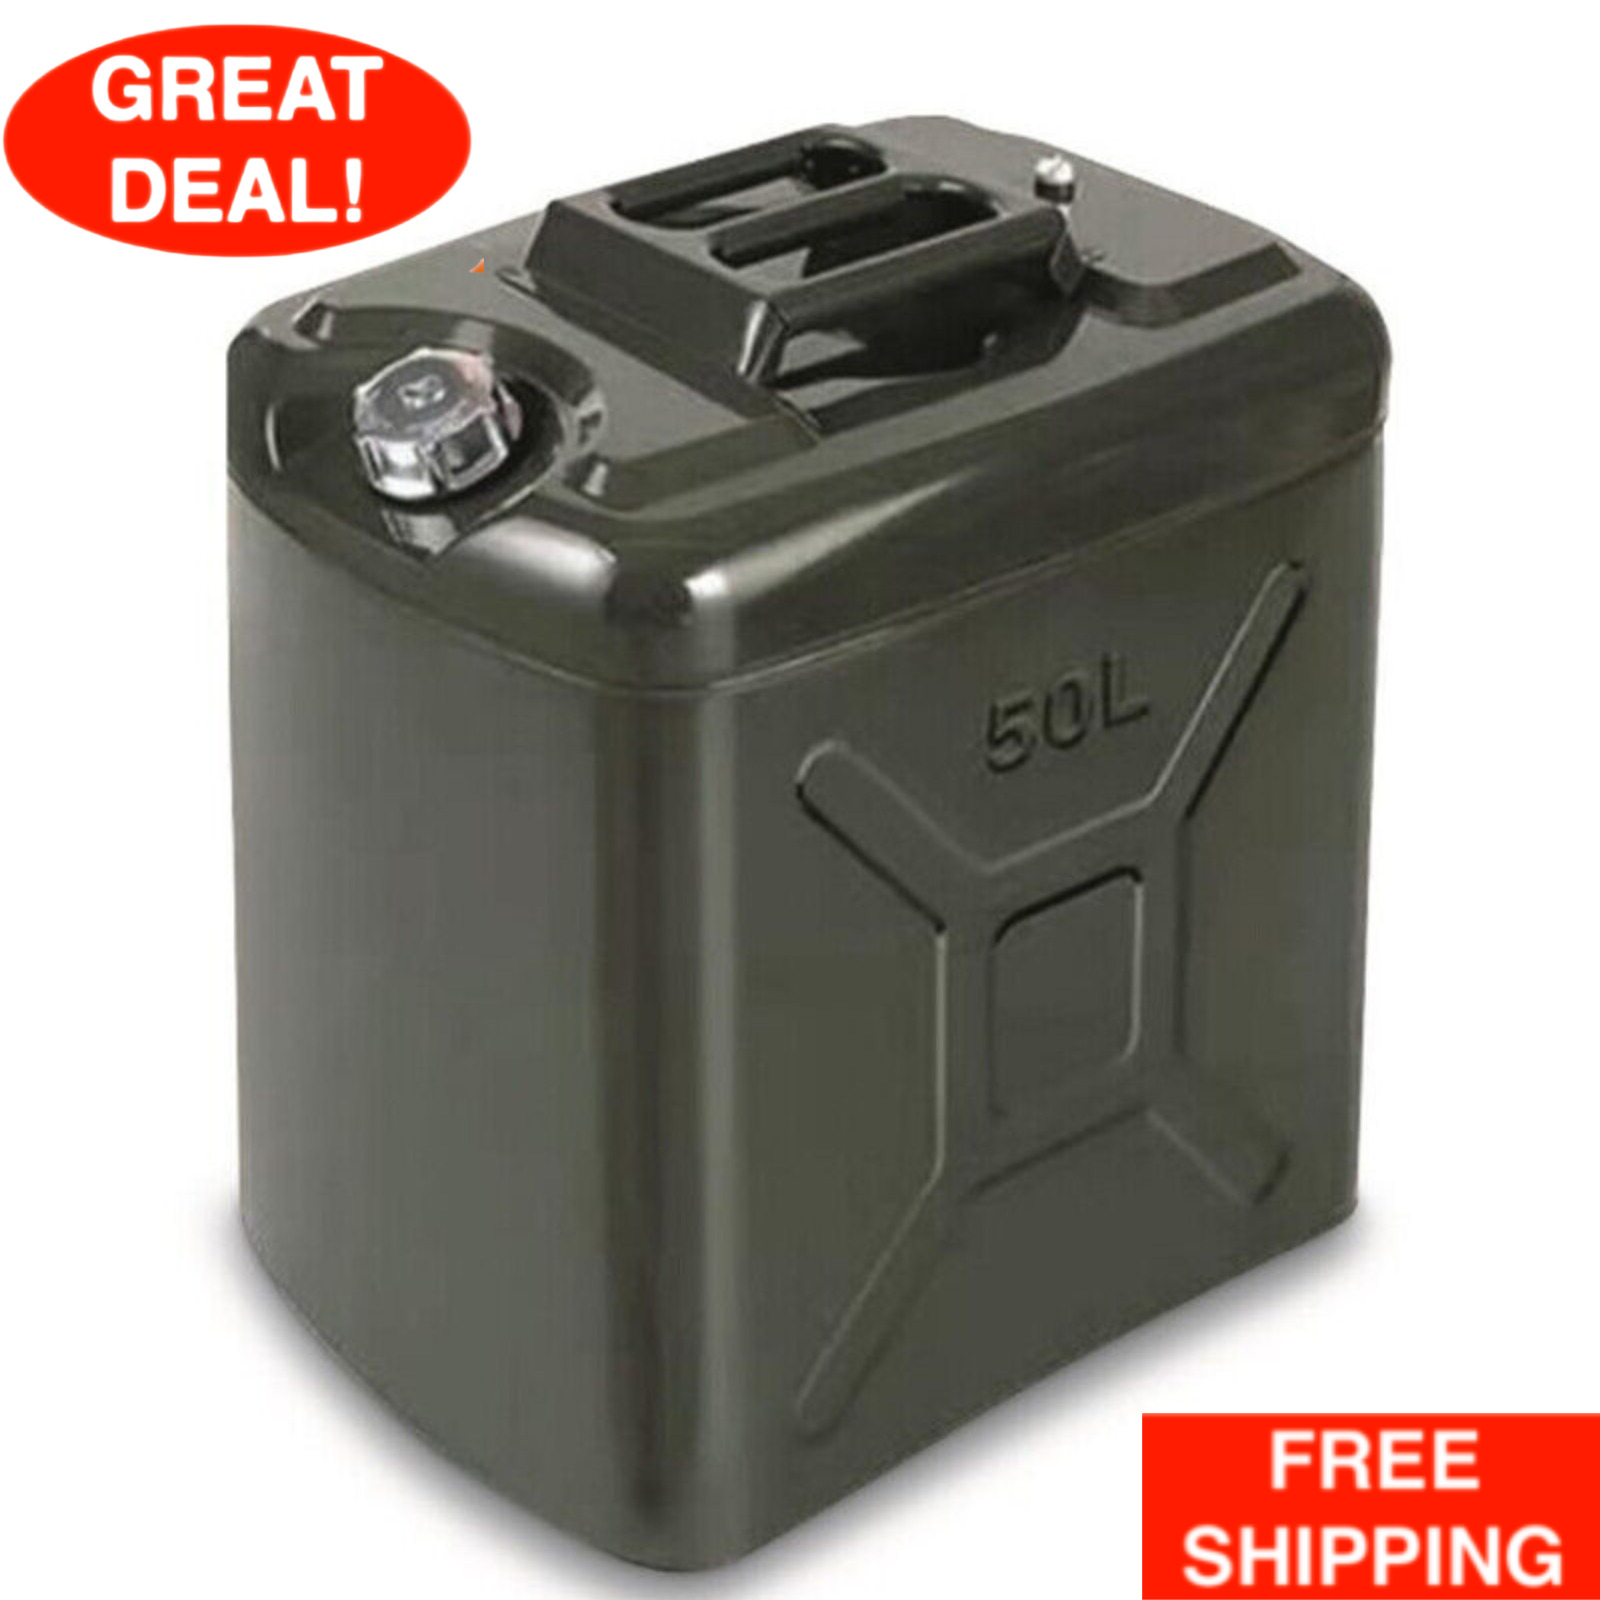 50L US Military Style Stainless Steel Jerry Can Storage Olive Drab New